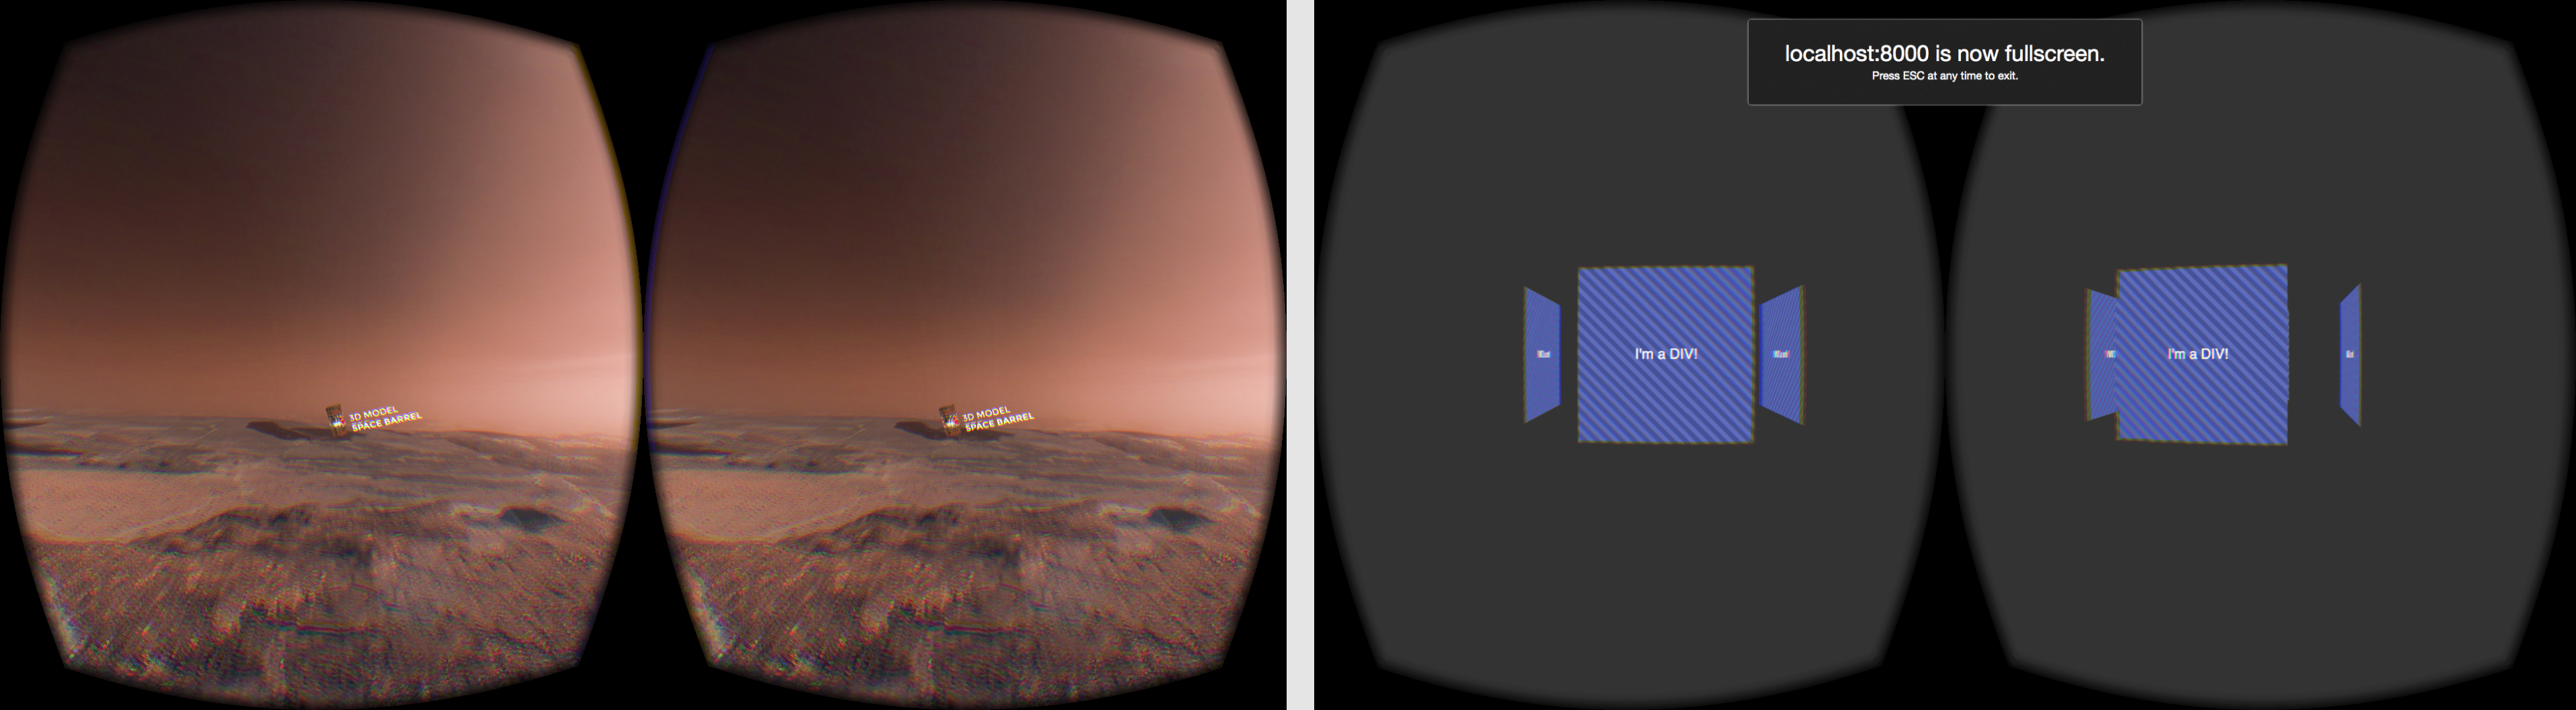 Early CSS-VR experiments showing s rendering into the Oculus Rift headset